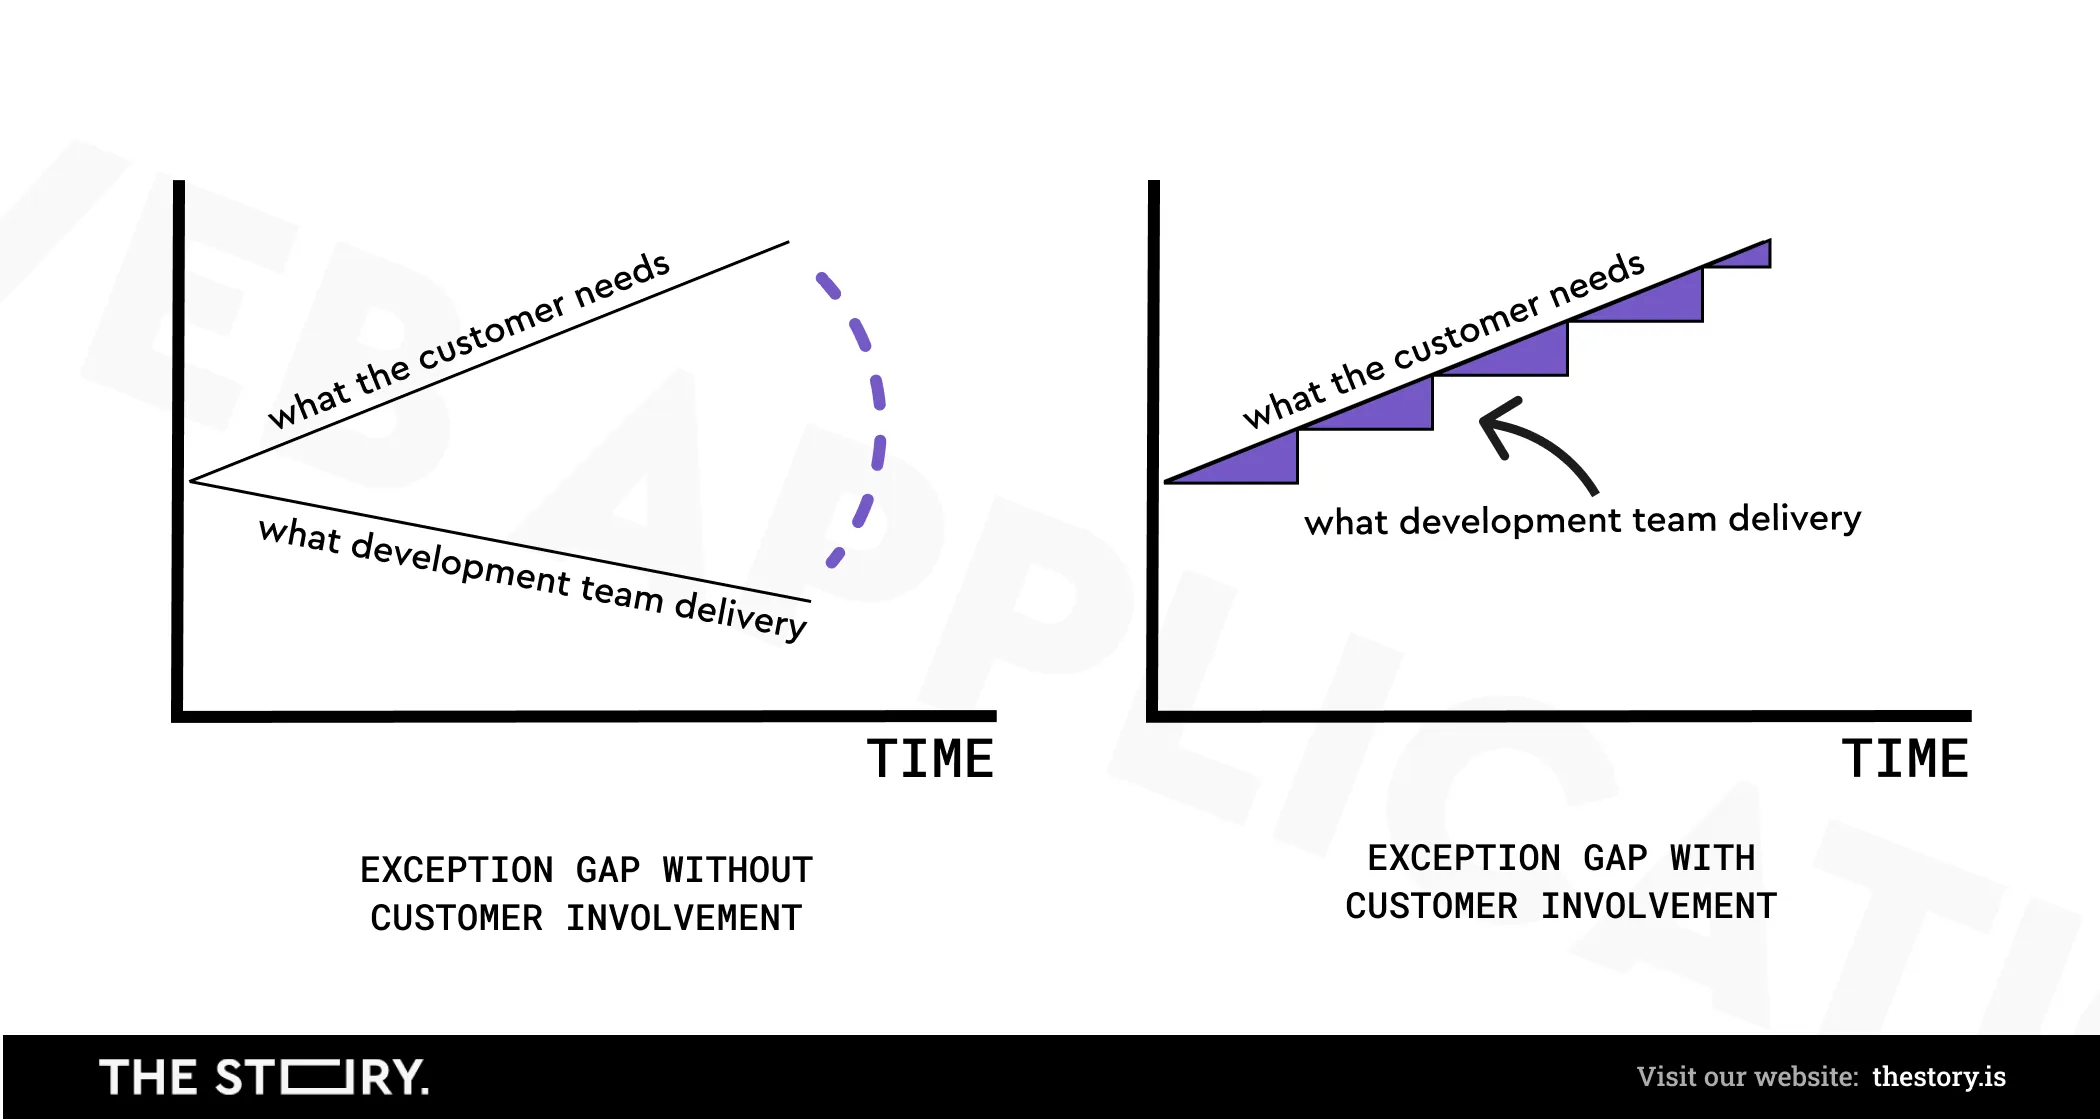 A chart presenting the gap between customer expectations and what the development team delivers